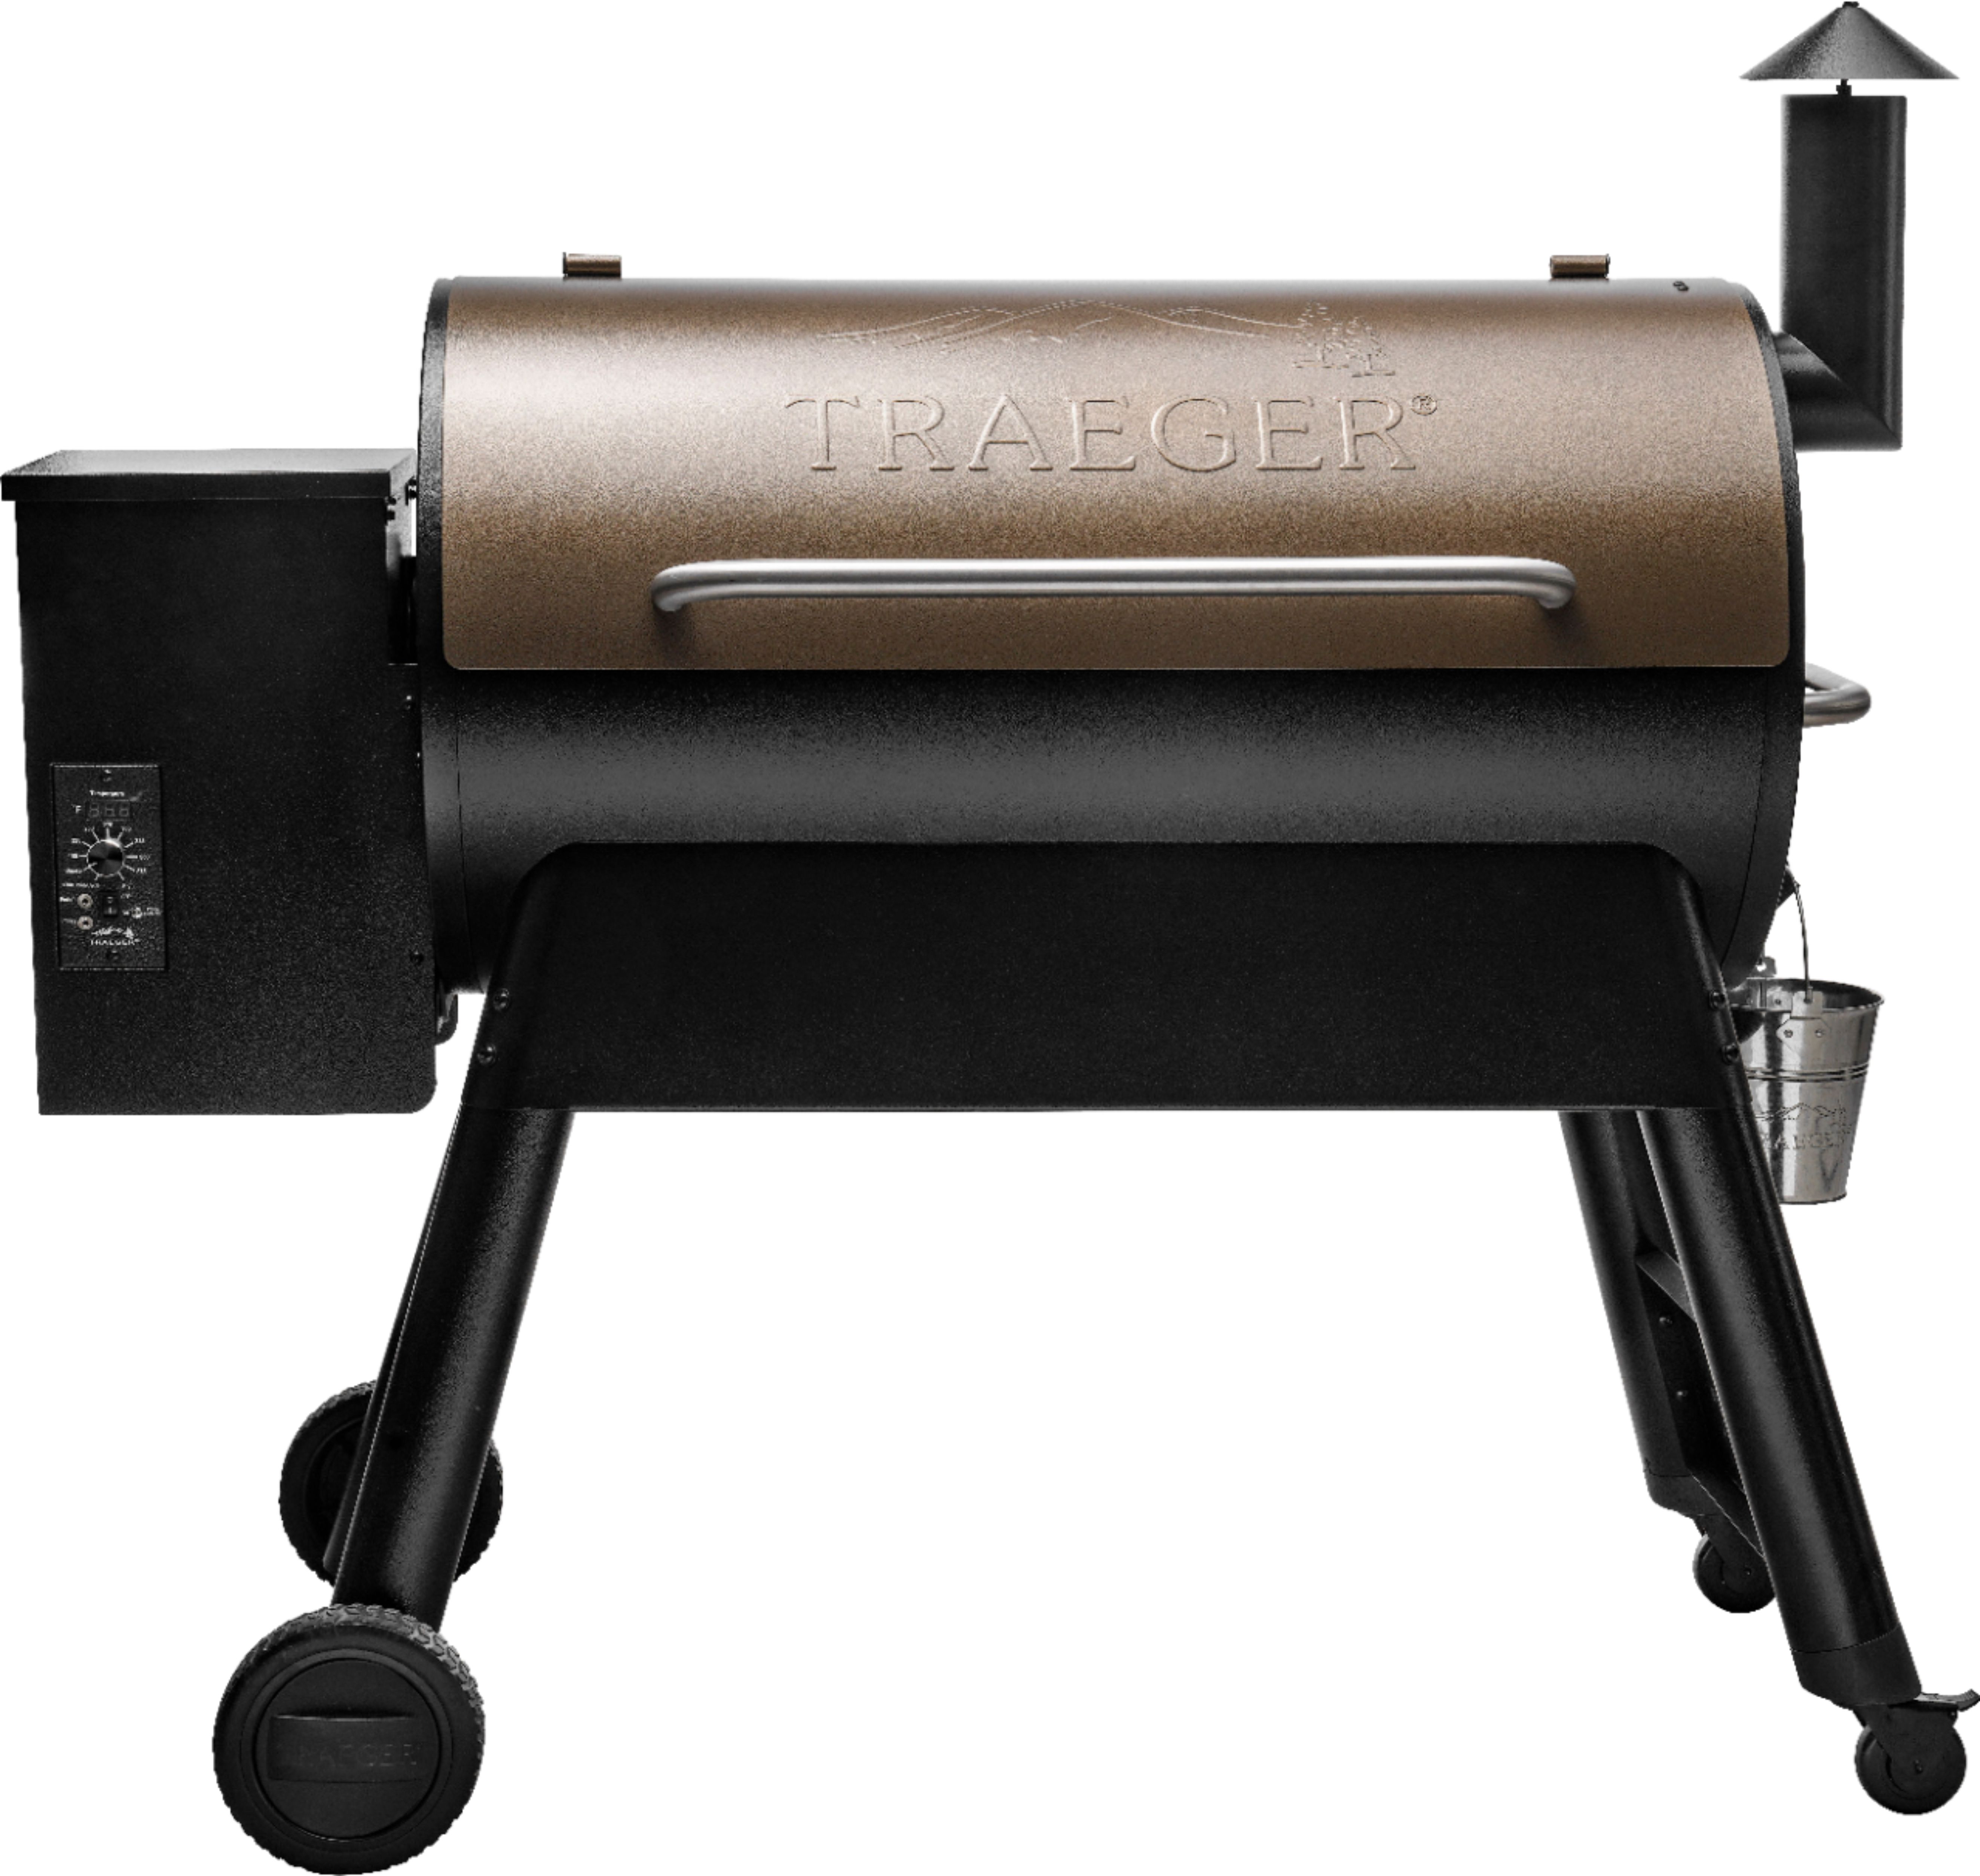 Angle View: Traeger Grills - Pro Series 34 Pellet Grill and Smoker - Bronze